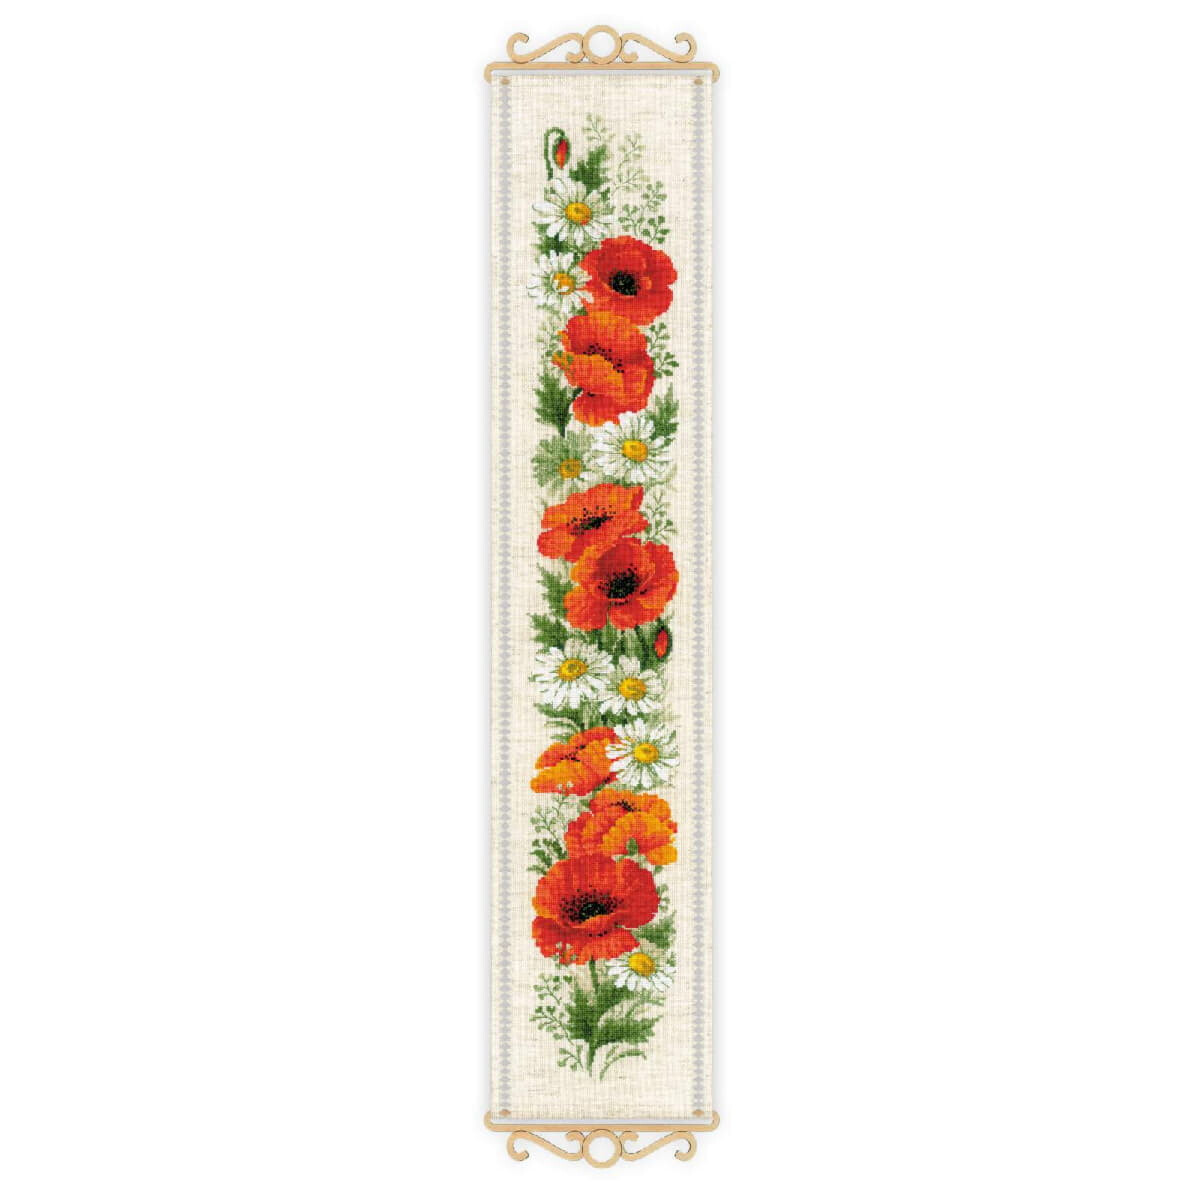 Riolis counted cross stitch kit "Poppies and...